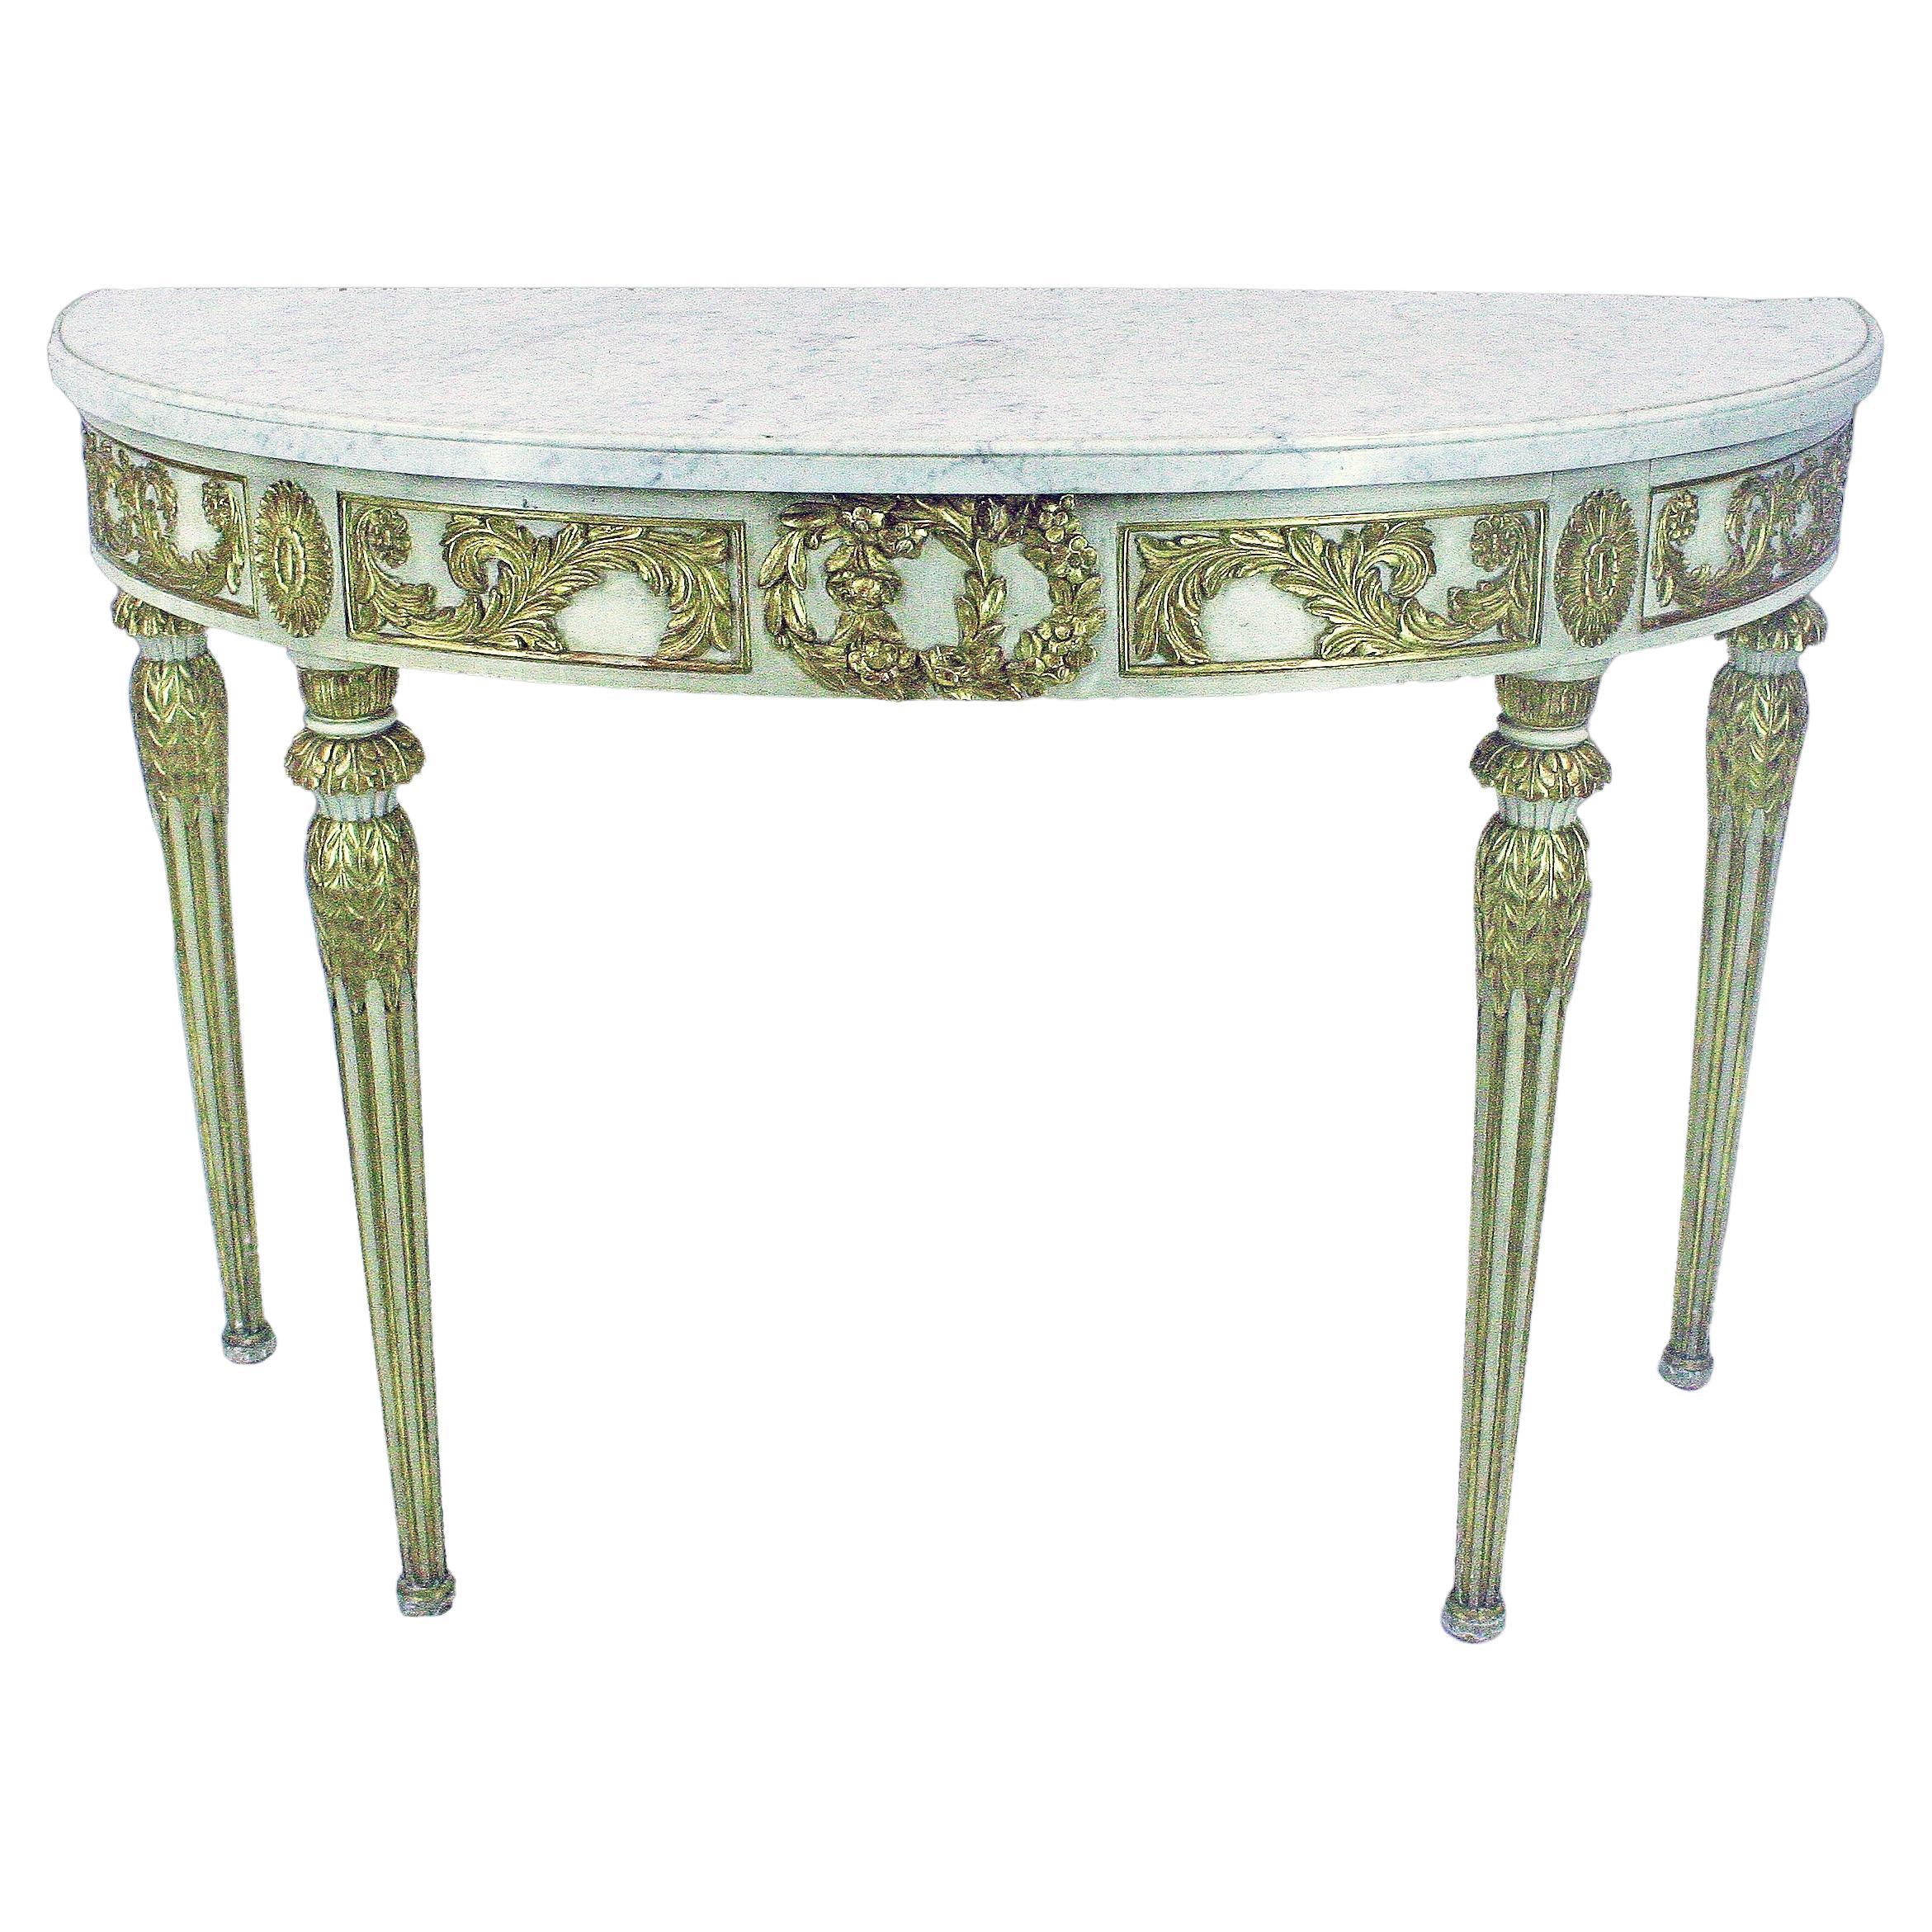 Mid-20th C. Argentine Giltwood and Marble Demi-Lune Console by Maison Jansen